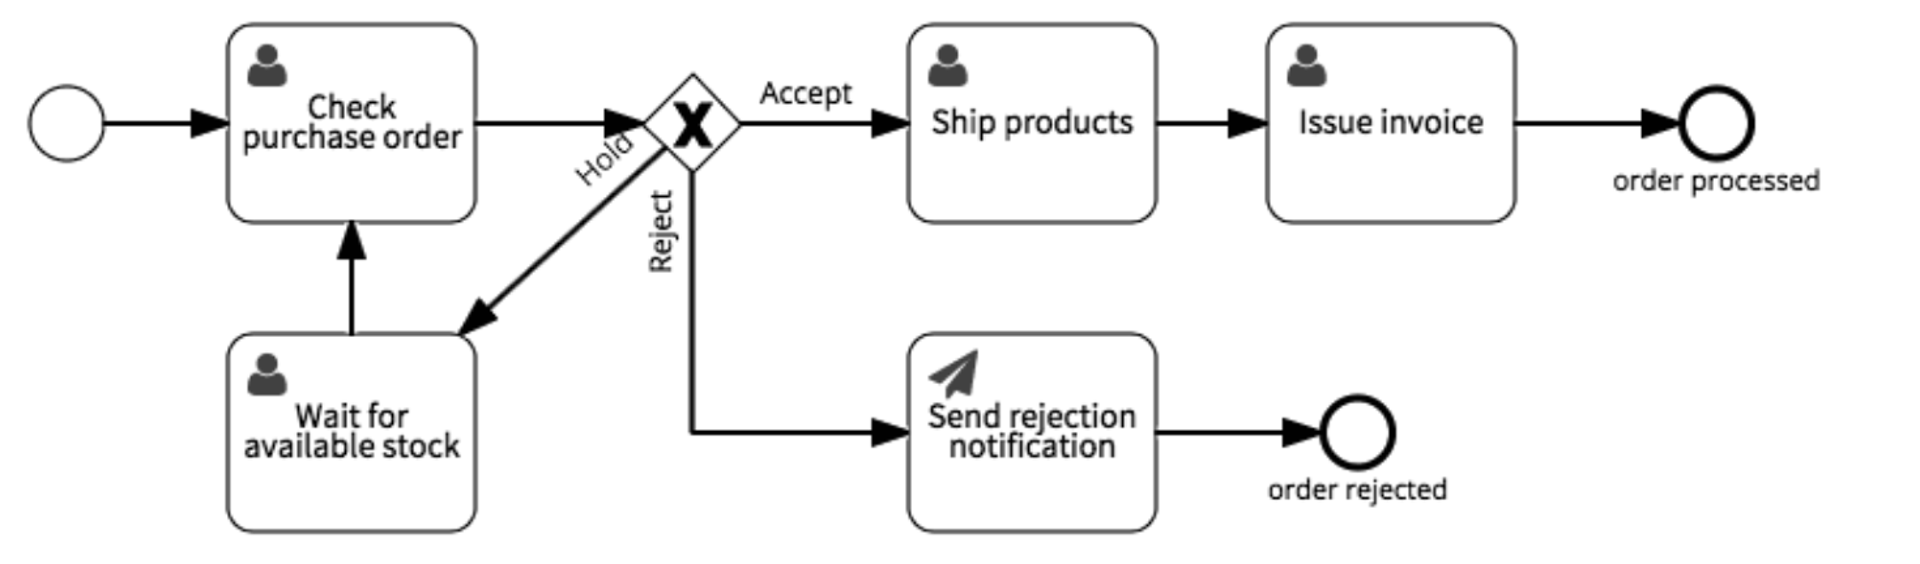 Fullfill Purchase Order Workflow Example